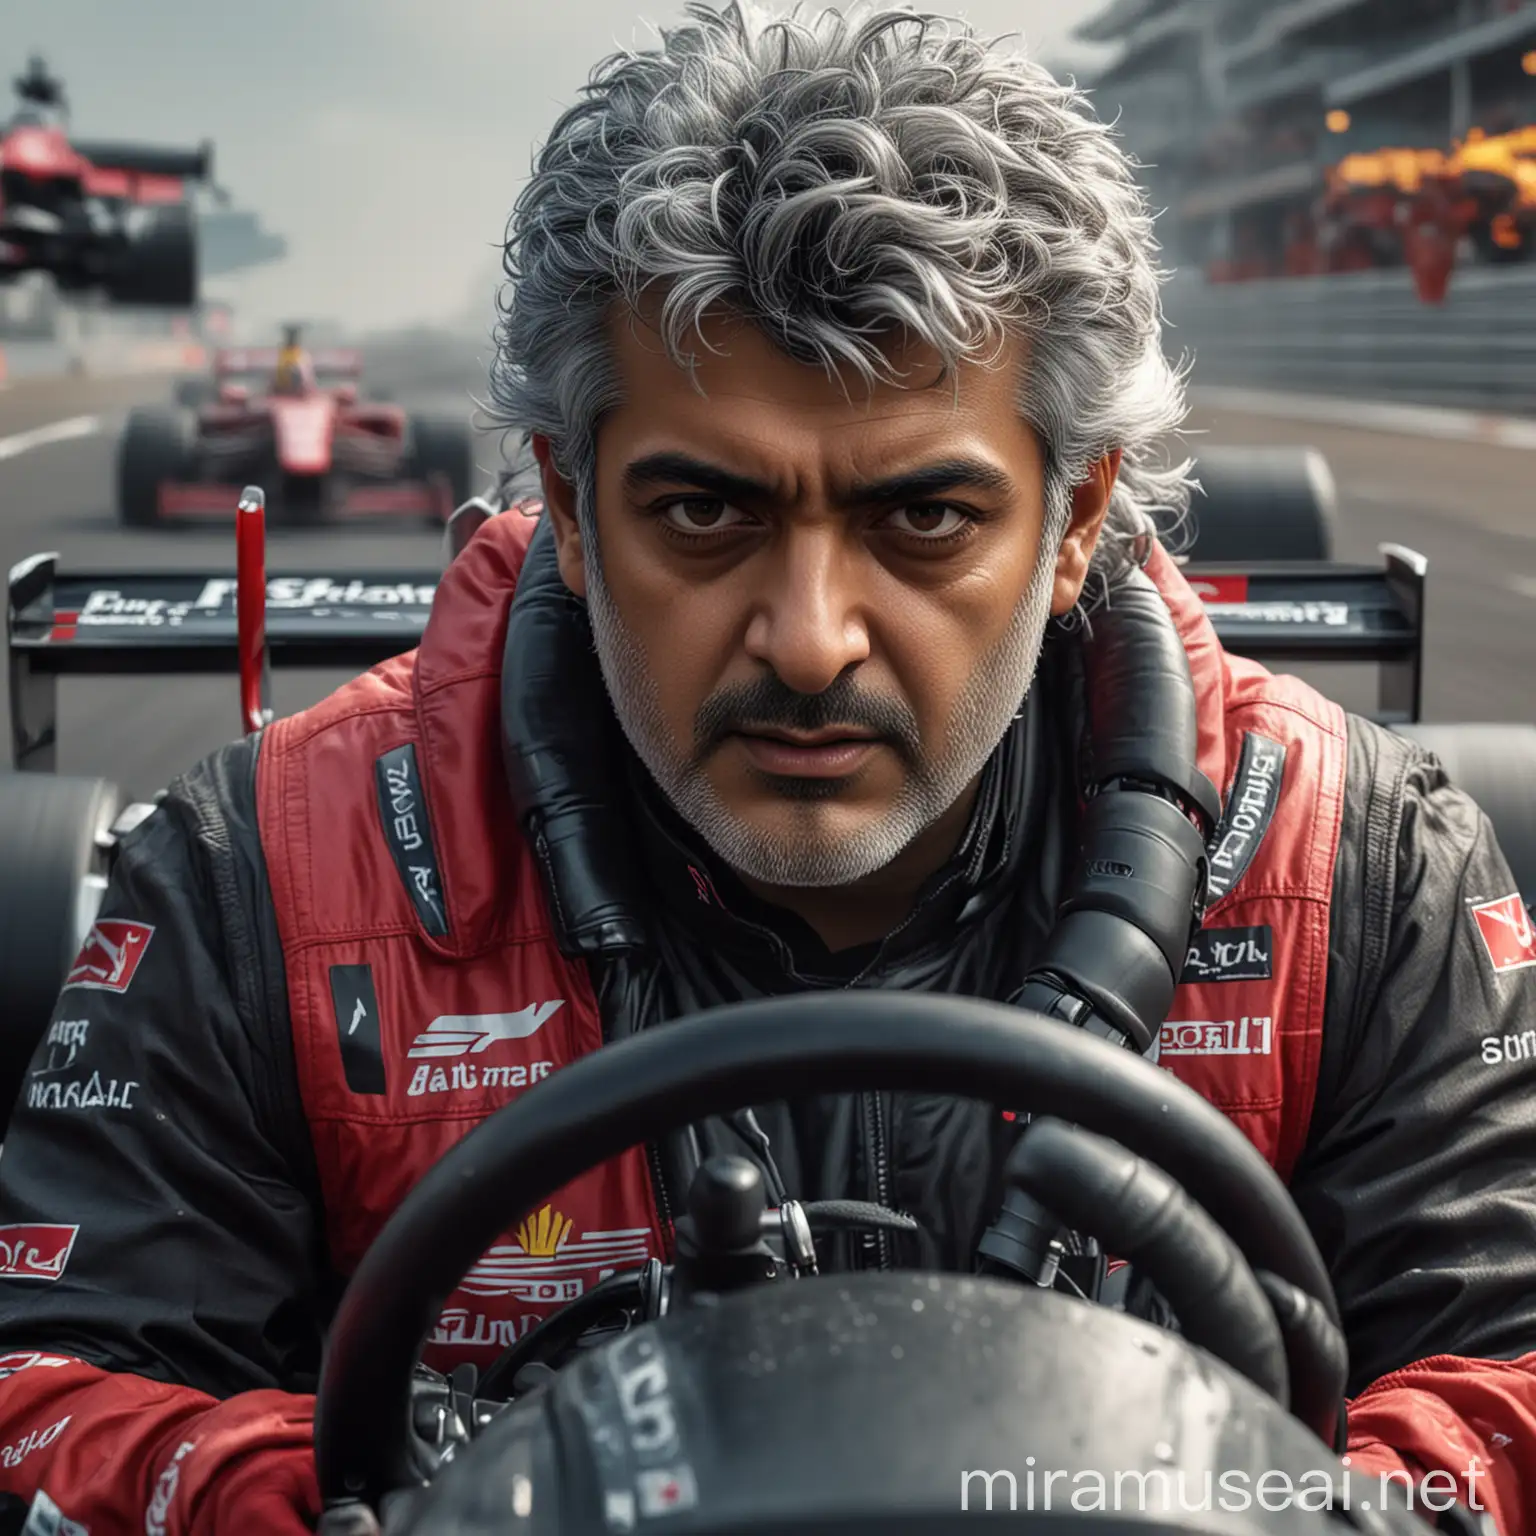 Majestic Ajith Kumar, with salt and pepper hair, driving an F1 car in full-bodied red, racing on an ultra-realistic, cinematic 8k video track, helmetless and determined, amidst a high-octane, adrenaline-fueled race scene, cyberpunk 